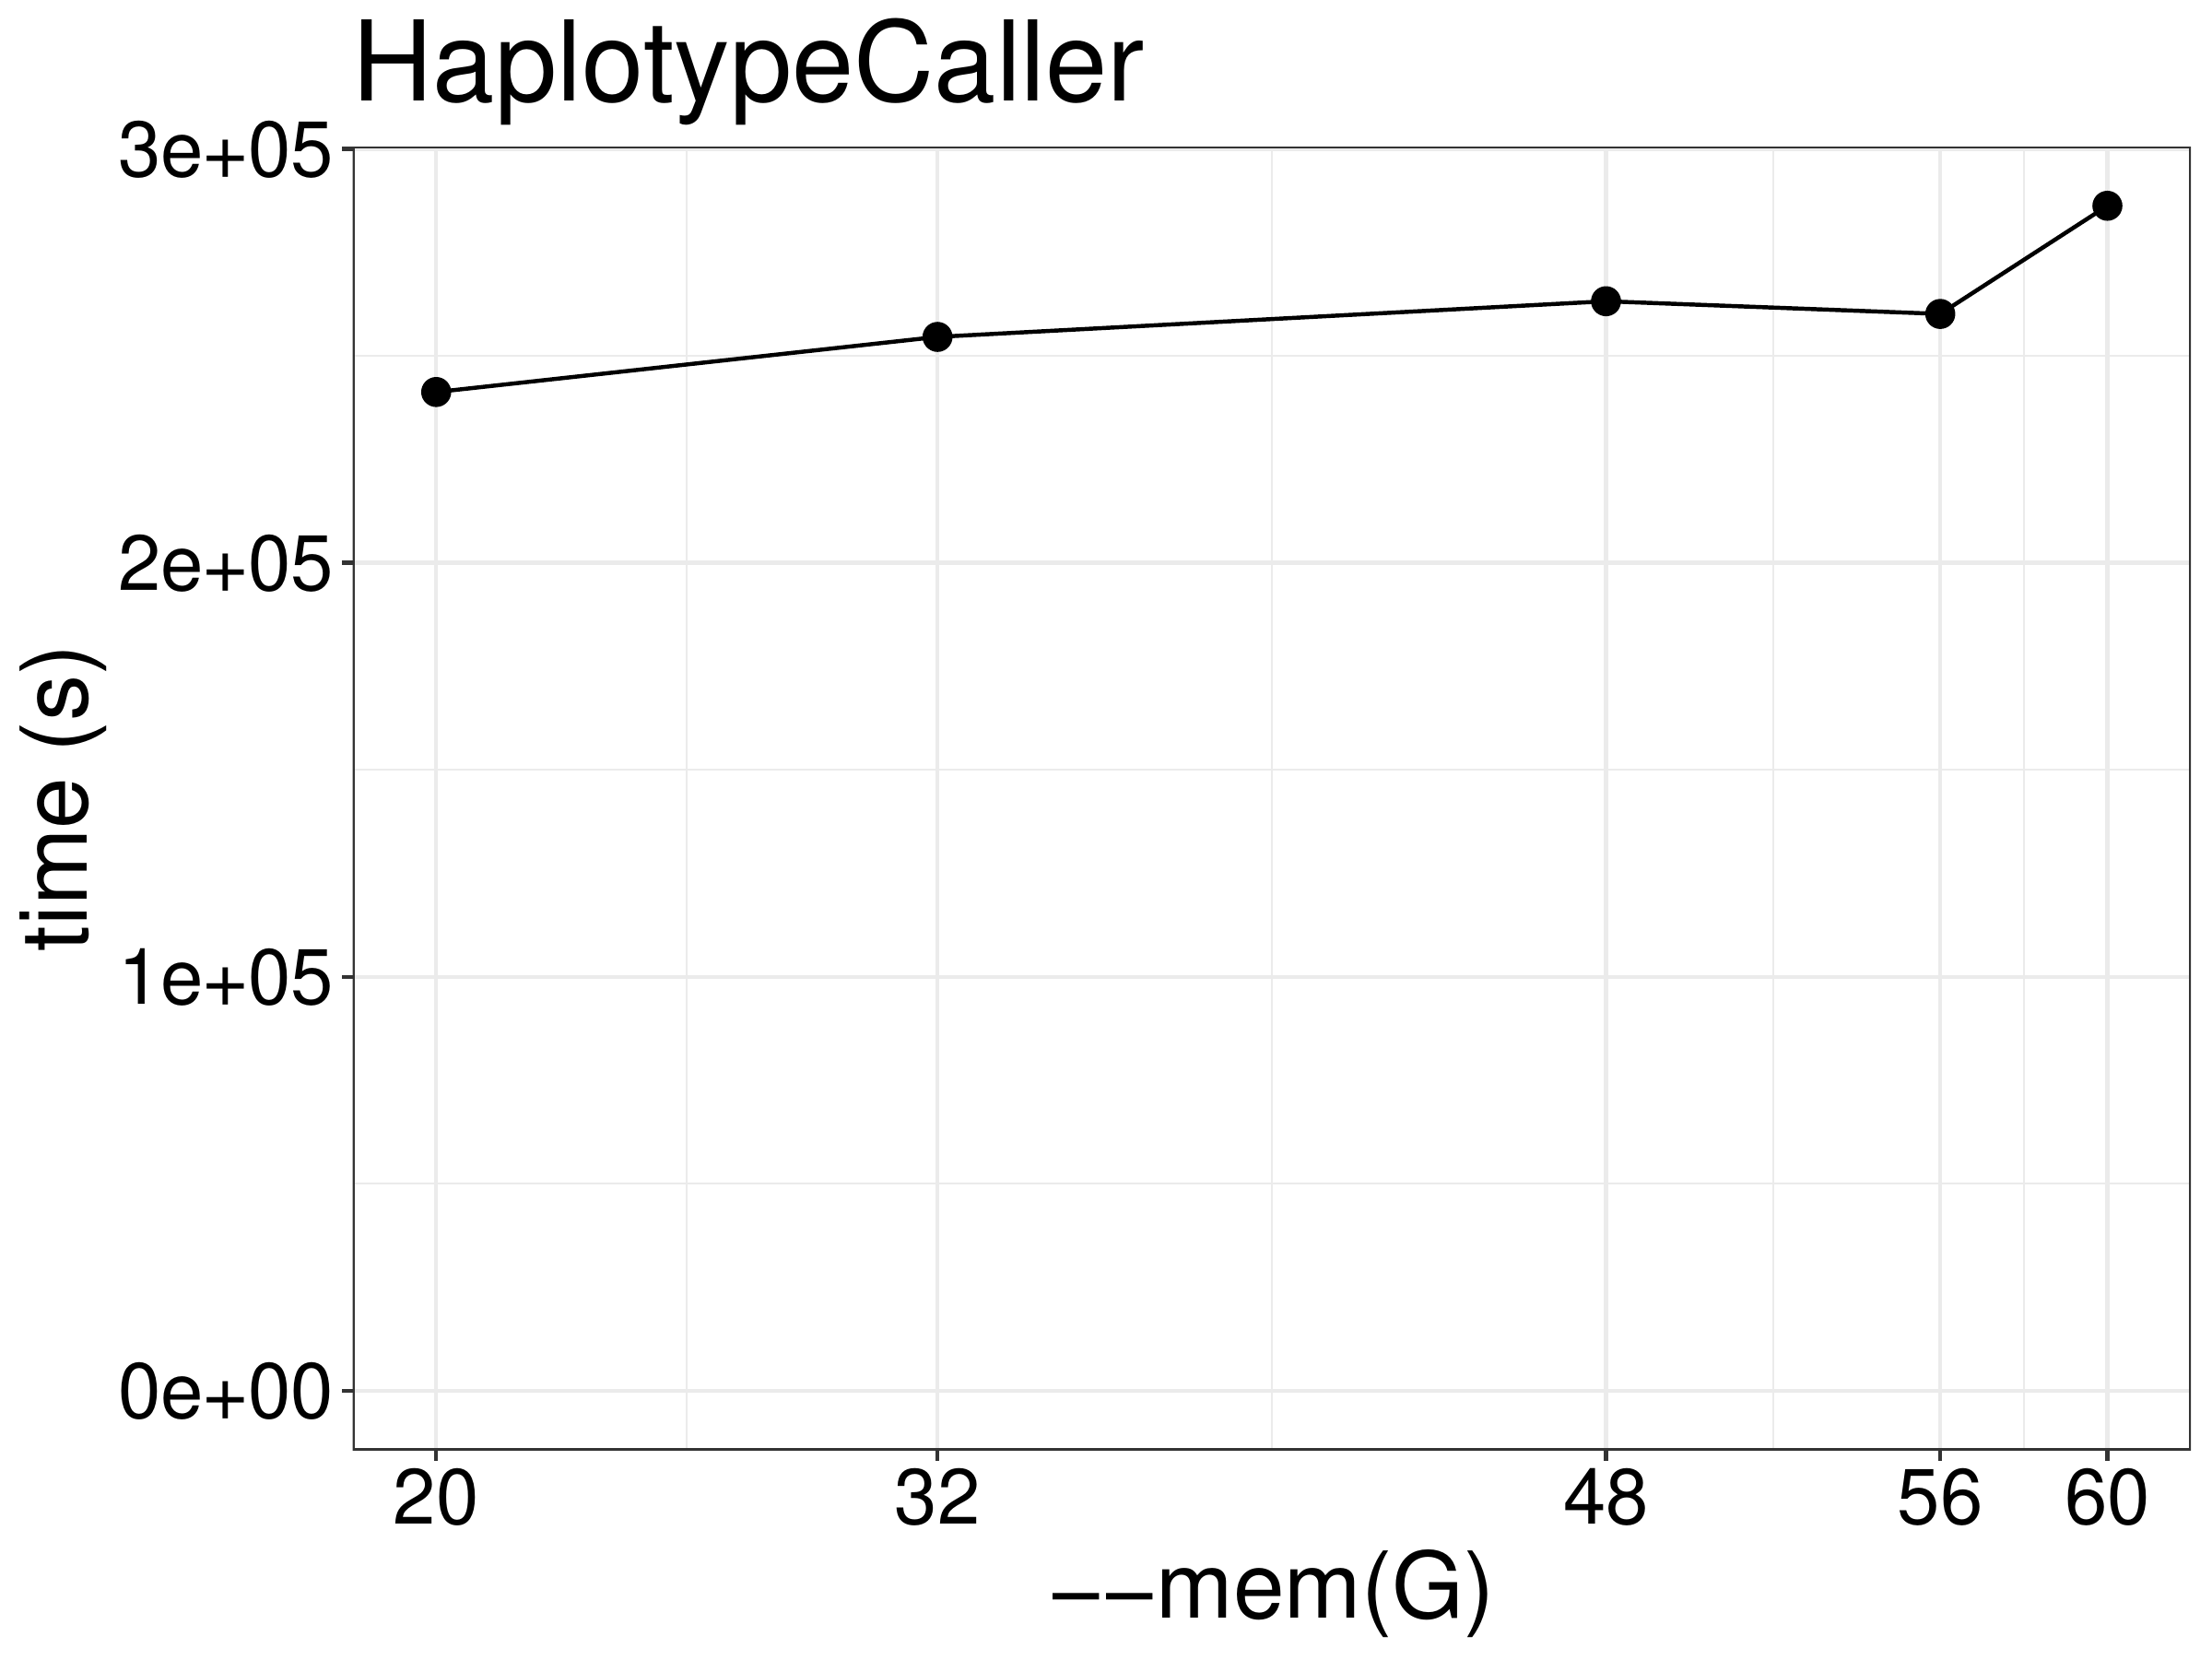 Runtime of HaplotypeCaller as a function of allocated memory